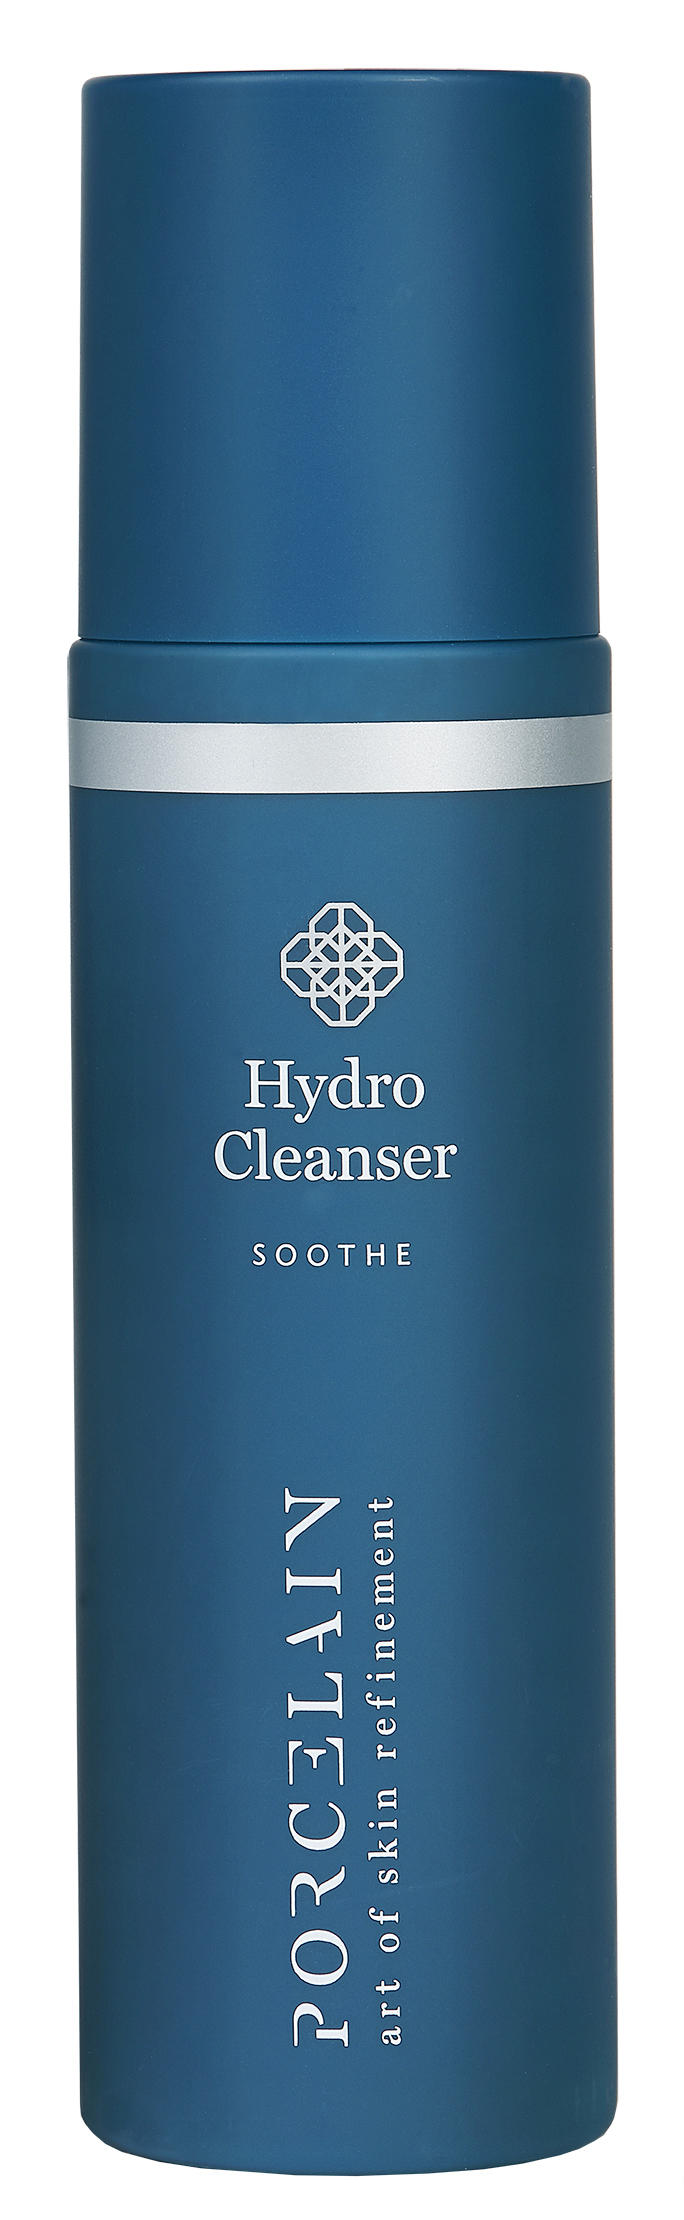 Sodium Hyaluronate is a key ingredient in our Soothe - Hydro Cleanser.